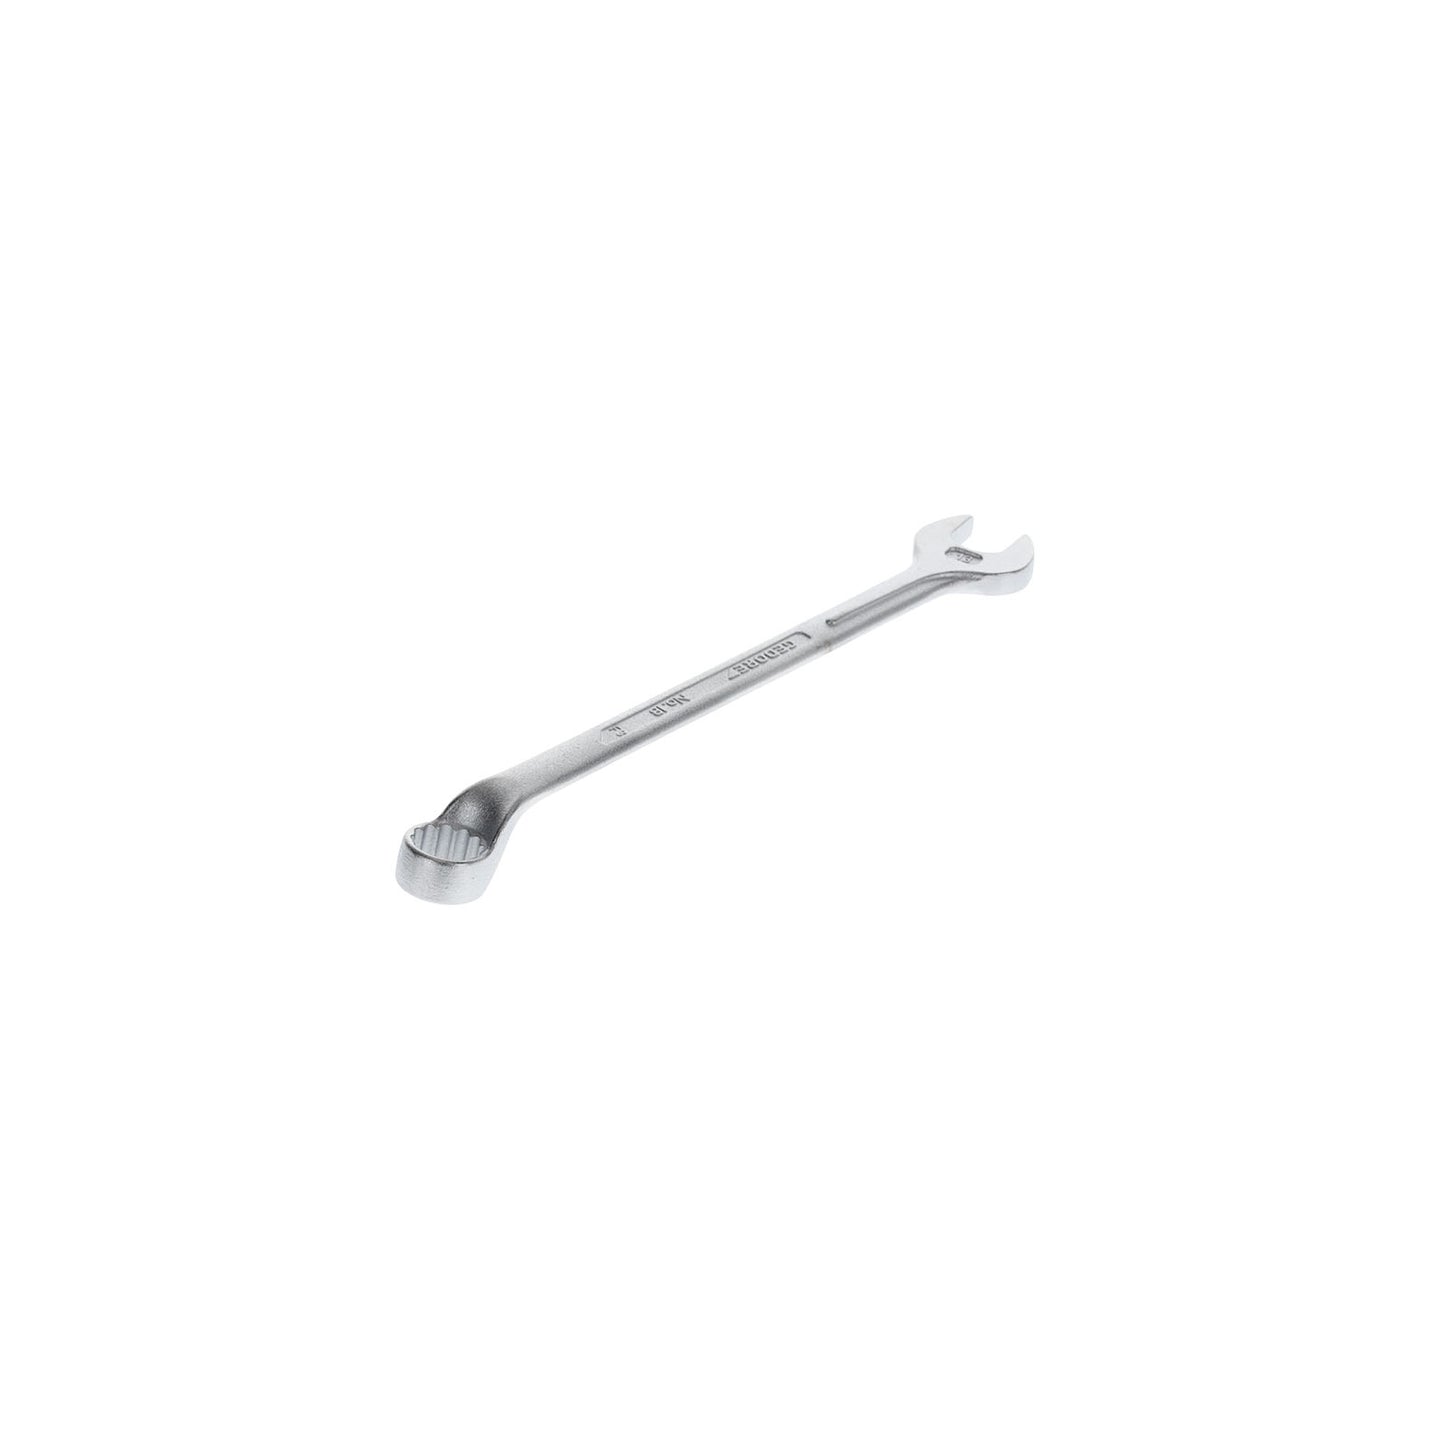 GEDORE 1 B 13 - Offset Combination Wrench, 13mm (6001130)